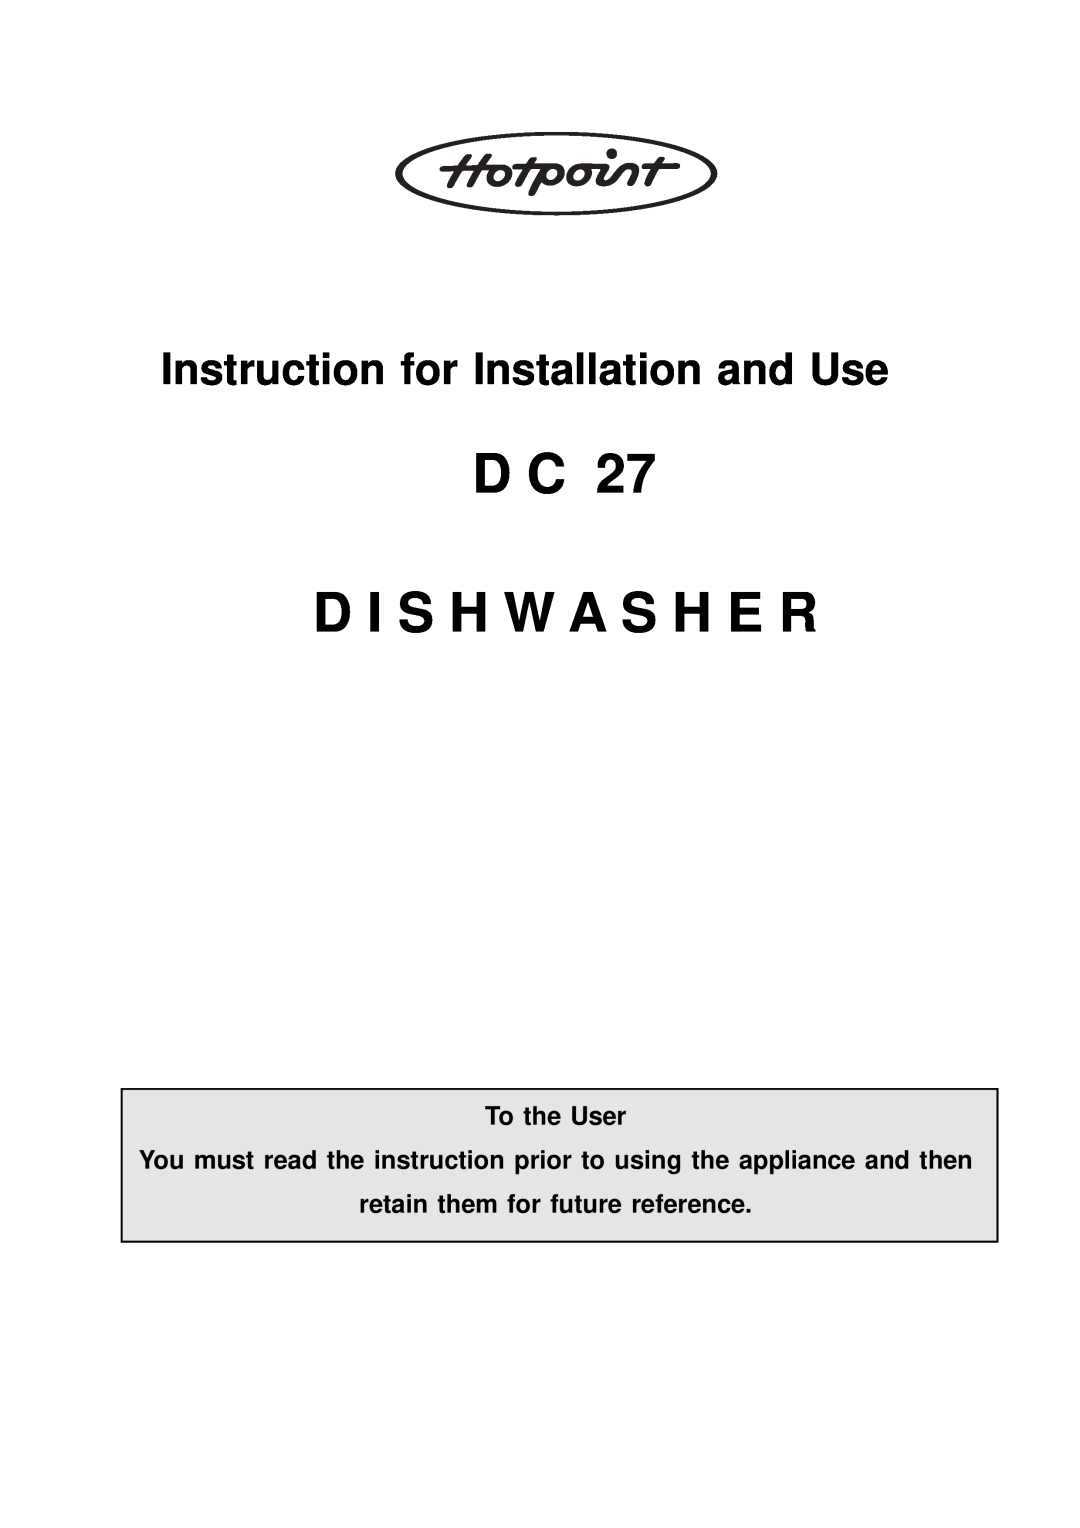 Hotpoint D C 27 manual D C D I S H W A S H E R, Instruction for Installation and Use, To the User 